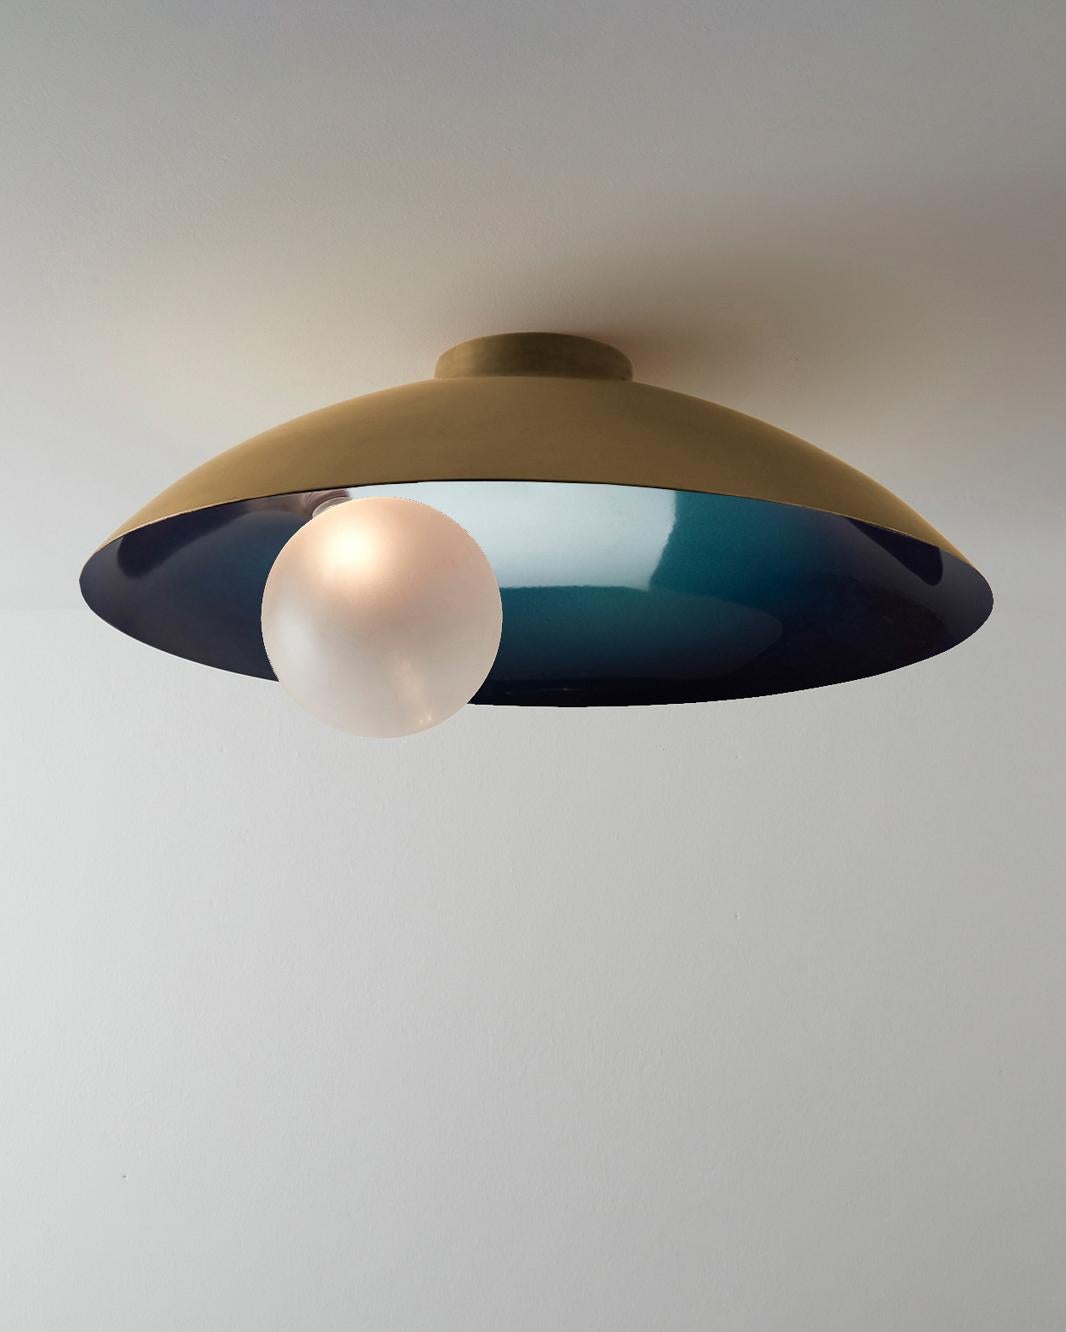 Oyster Midnight Blue and Brushed Brass Ceiling Mounted Lamp by Carla Baz
Dimensions: Ø 70 x H 26 cm.
Materials: Brushed brass.
Weight: 9 kg.

Available in brushed brass, copper or bronze finishes. Available in different color options. Please contact